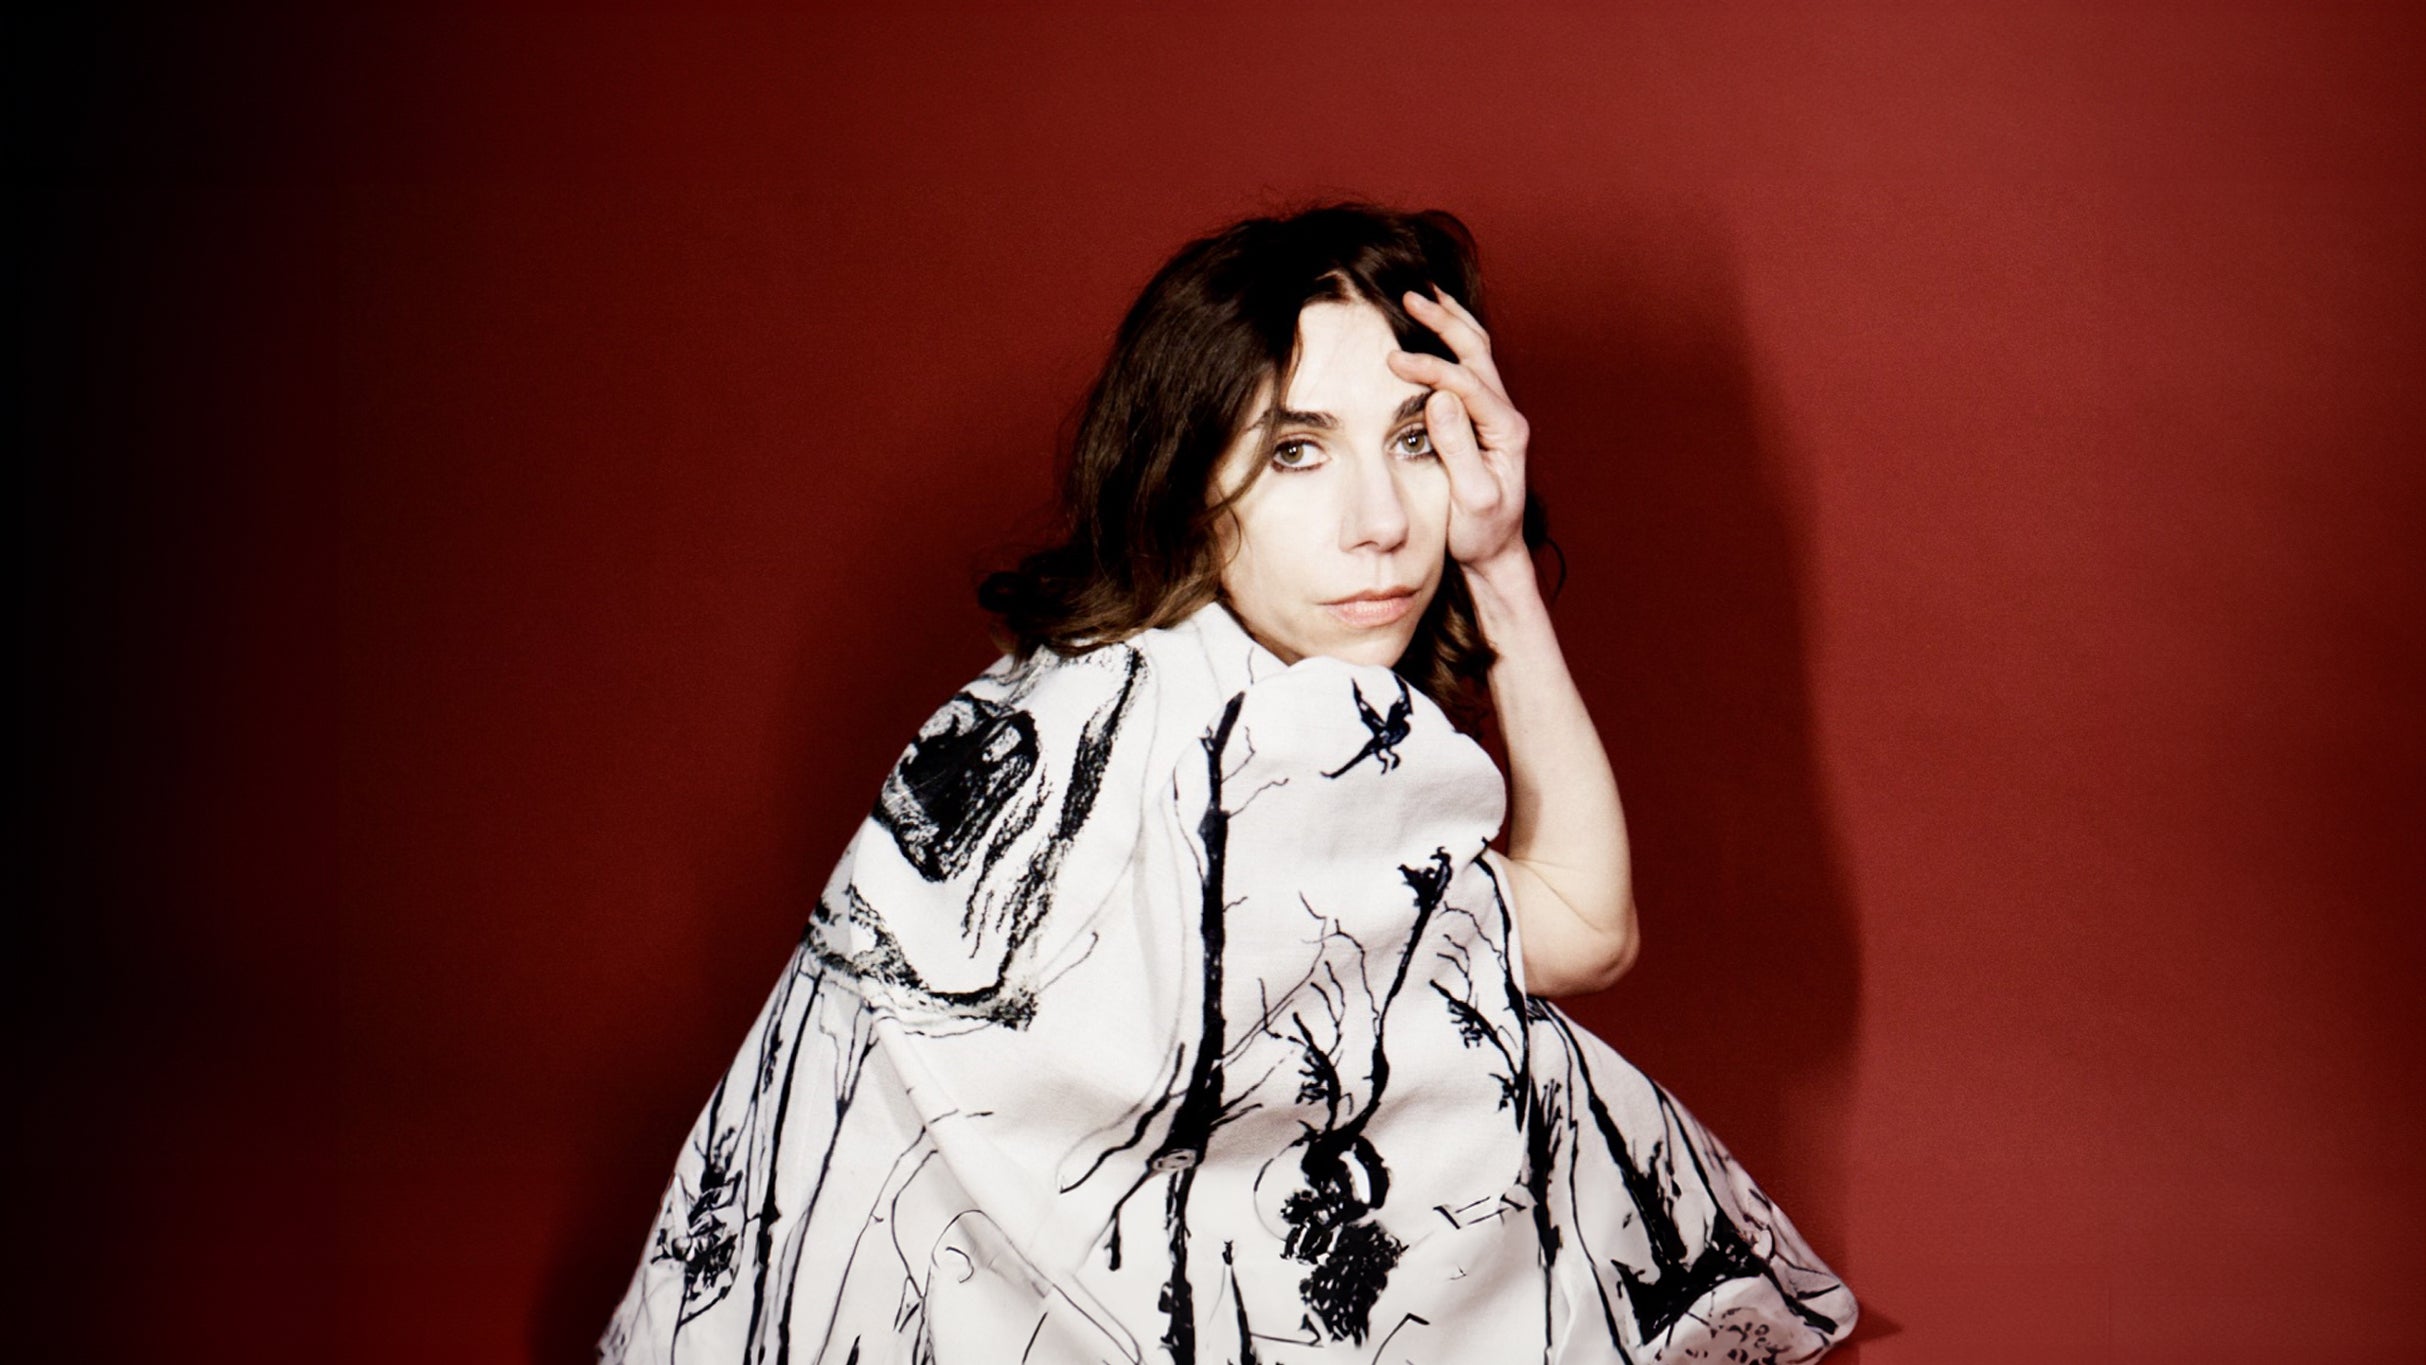 An Evening With PJ Harvey free presale code for show tickets in Washington, DC (The Anthem)